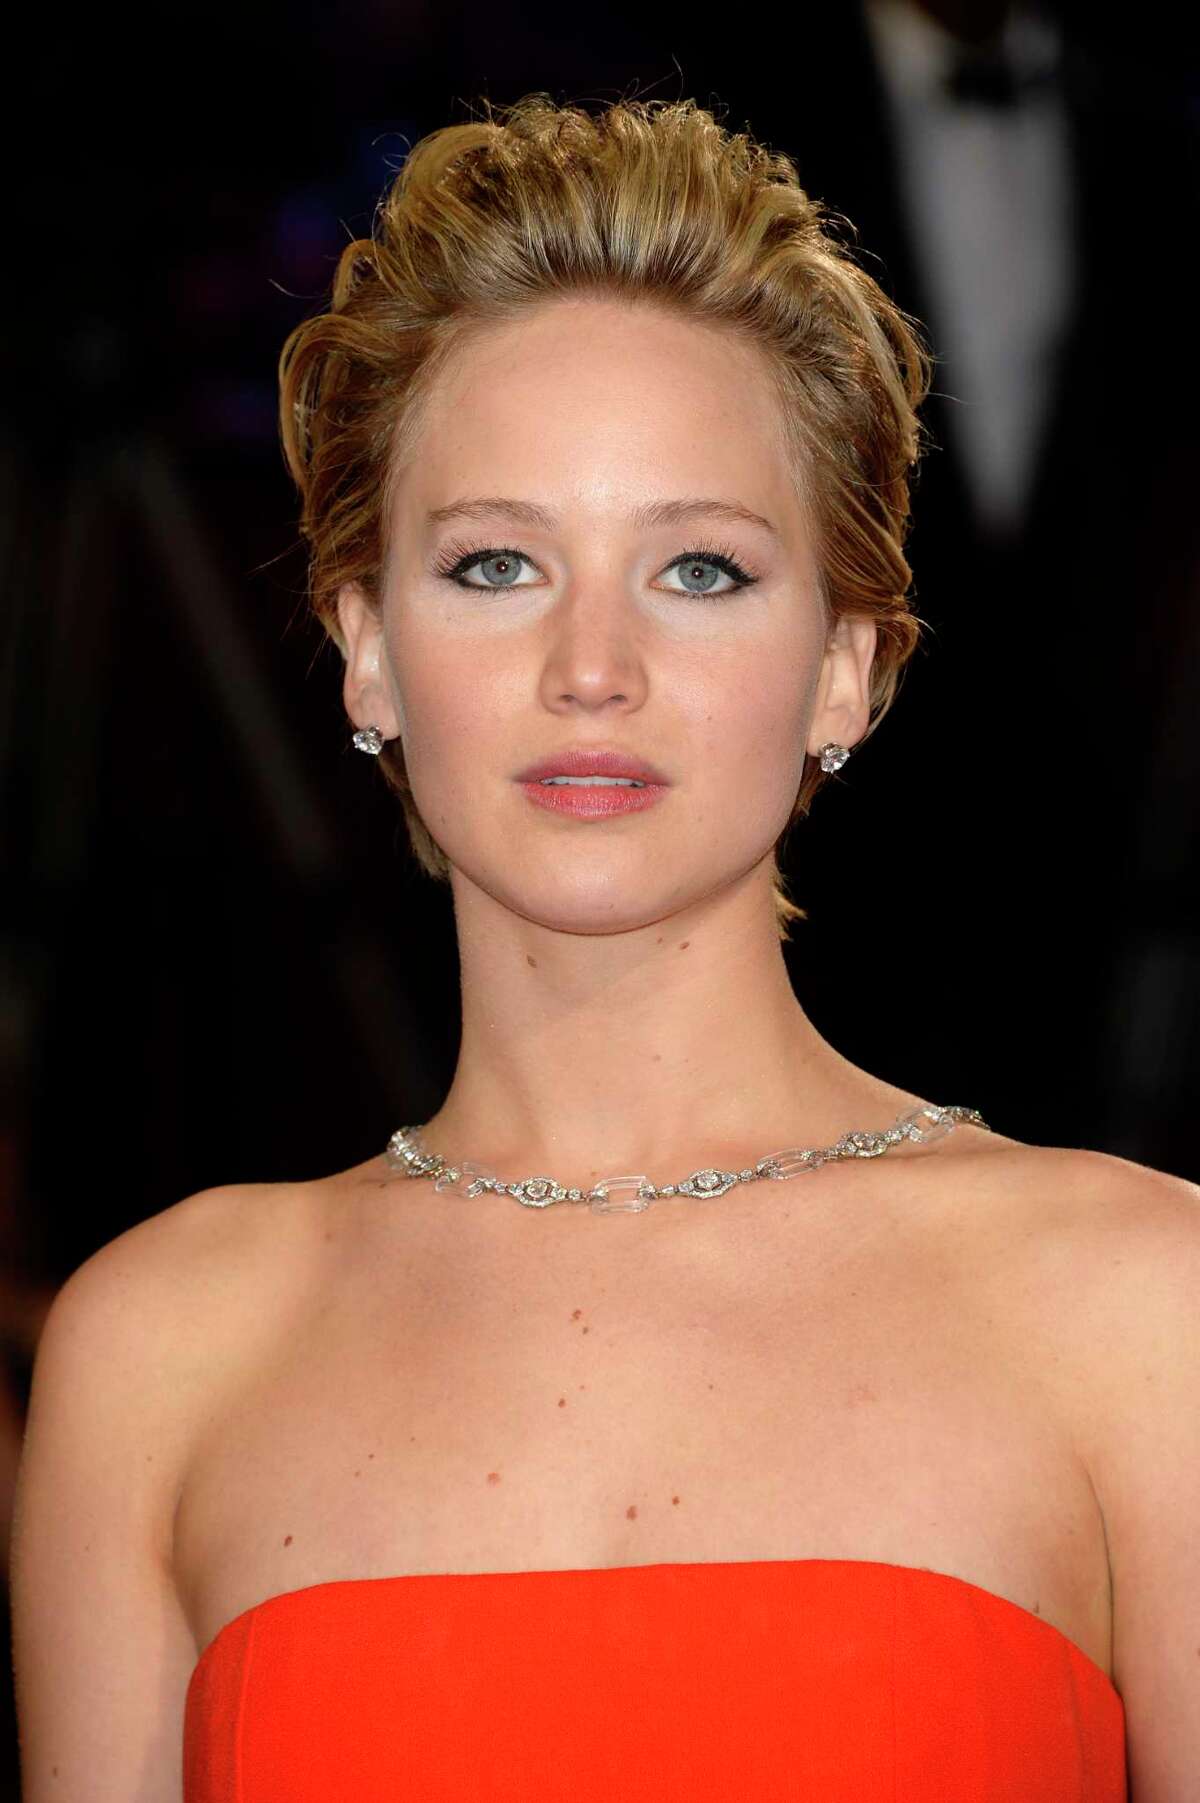 FILE - In this Sunday, March 2, 2014, file photo, Jennifer Lawrence arrives at the Oscars at the Dolby Theatre in Los Angeles. A publicist for Lawrence says the actress has contacted authorities after nude photos of her were apparently stolen and posted online. Intimate images of the Oscar-winning actress began appearing online on Sunday, Aug. 31, 2014, and nude images purported to be of other female celebrities were also being circulated online. The source of the leak was not immediately known. (Photo by Dan Steinberg/Invision/AP, File)